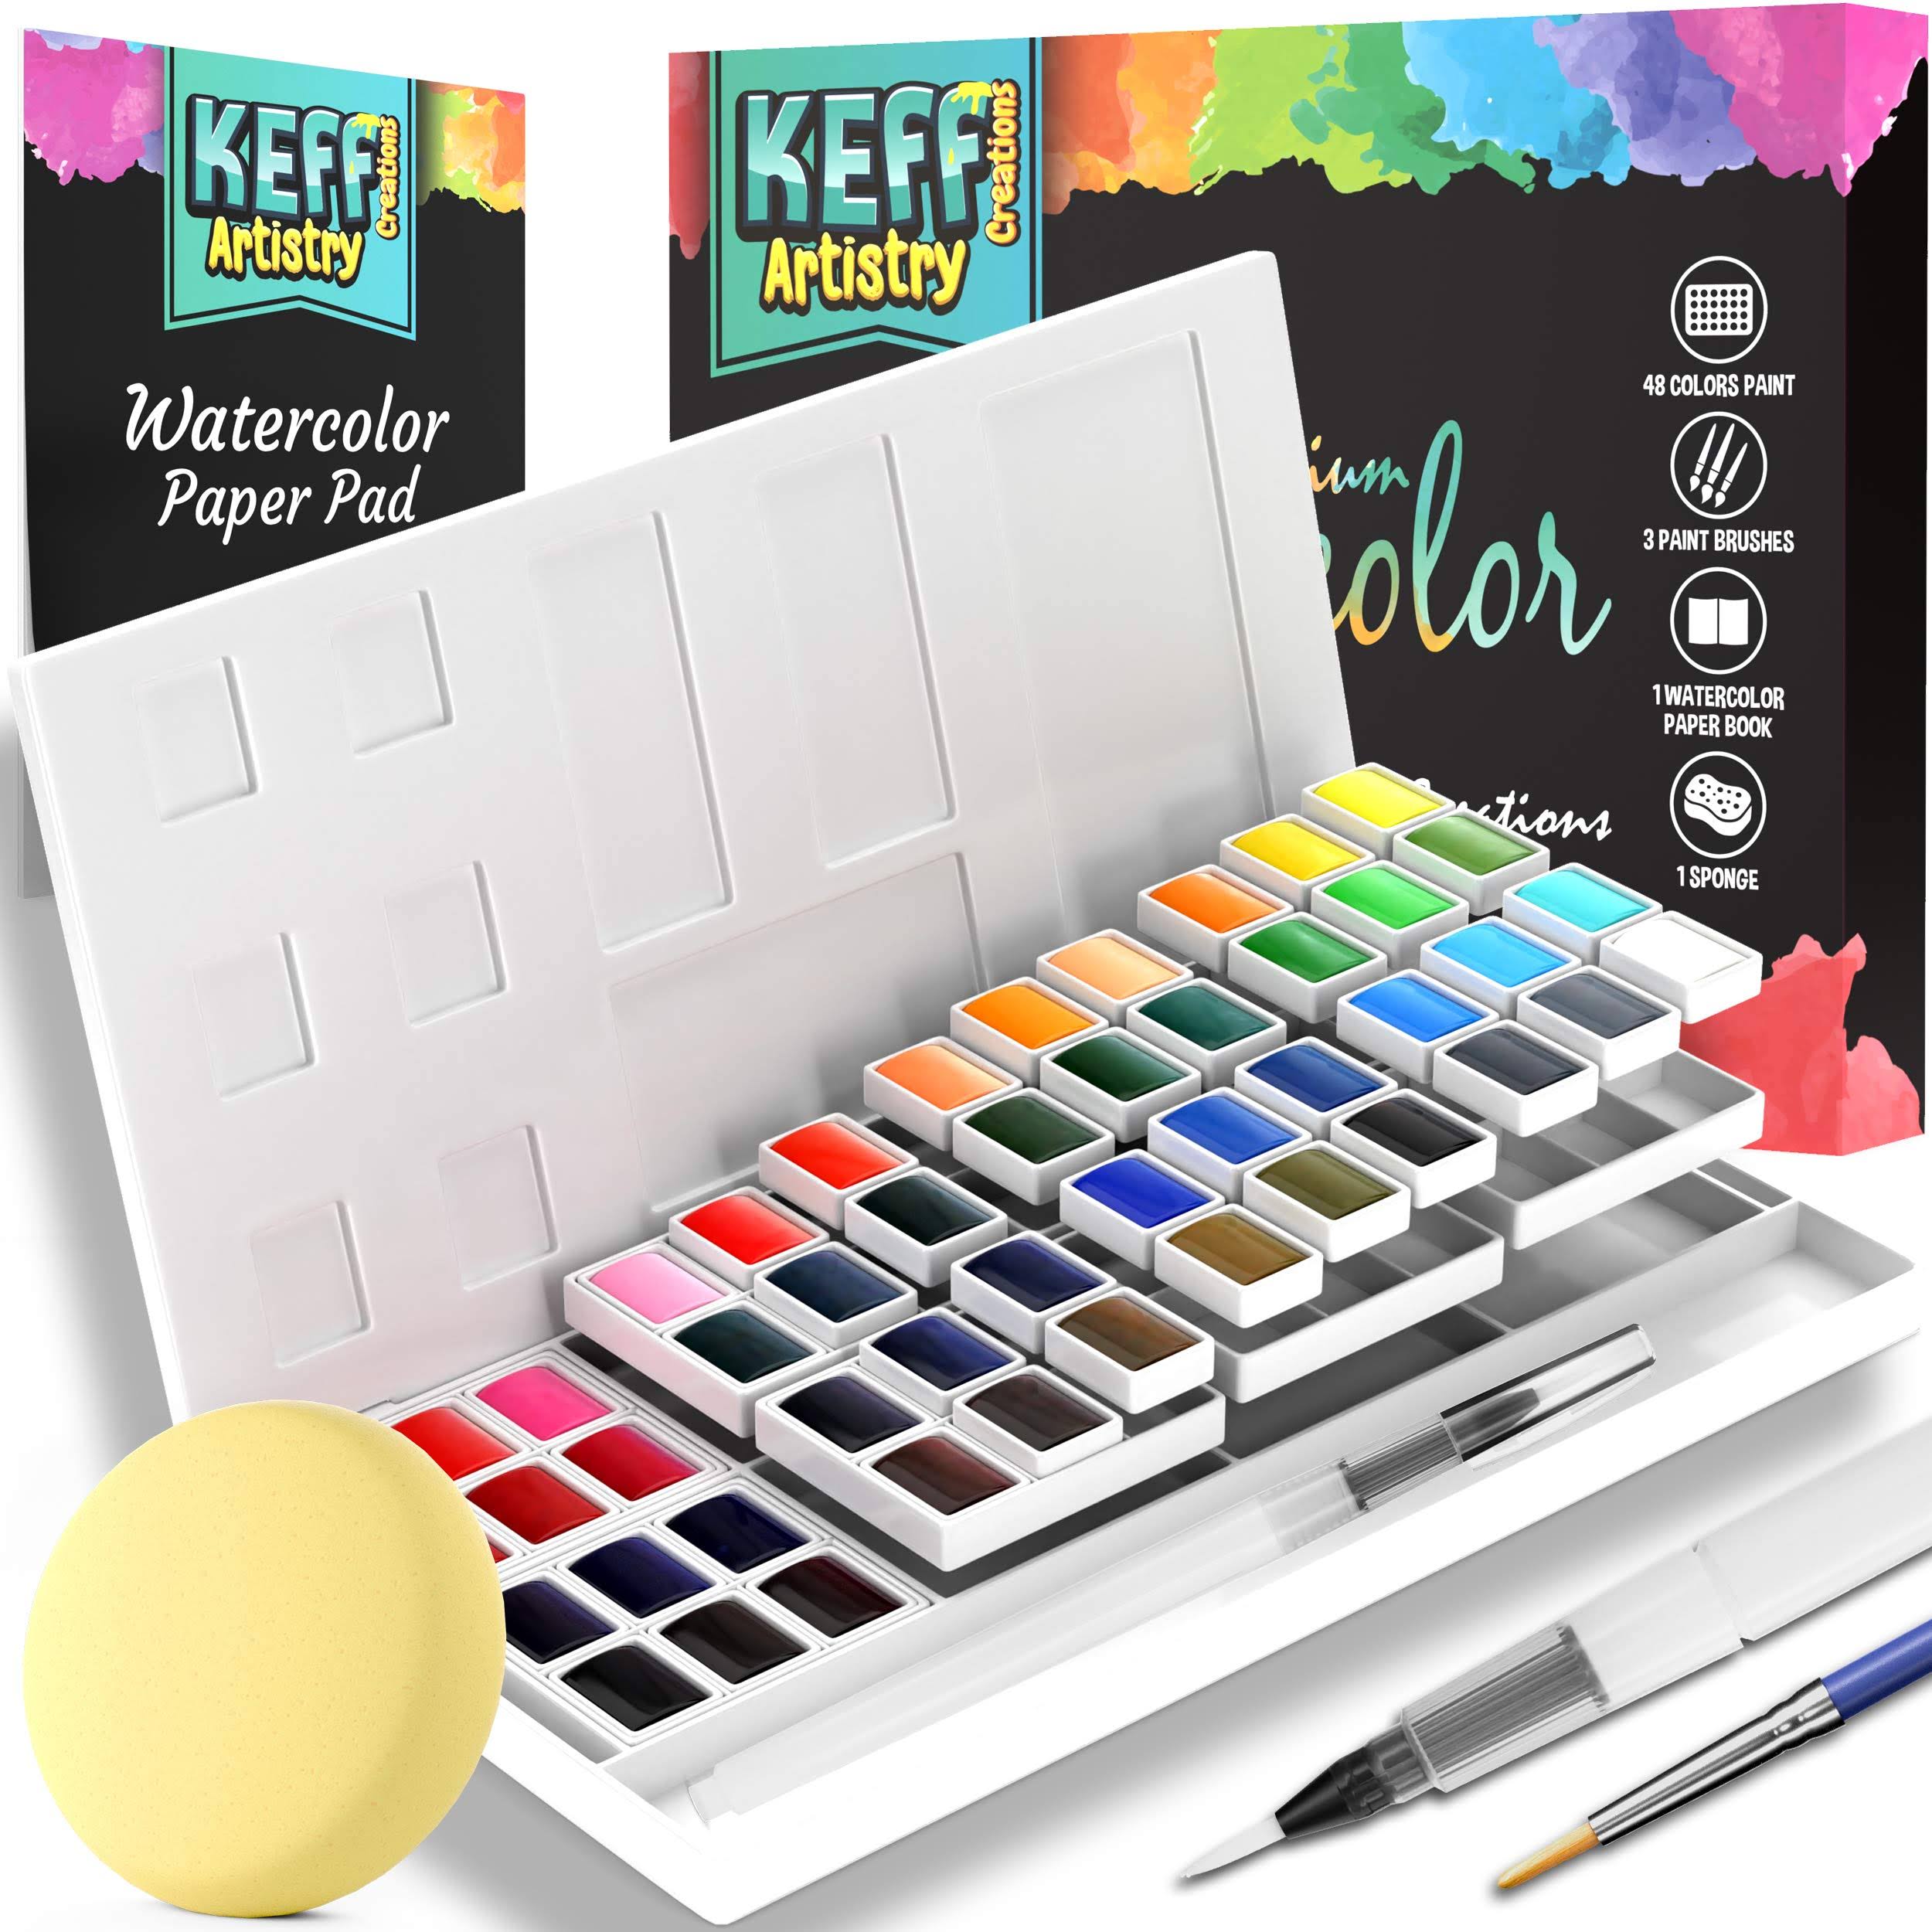 55 Pieces Watercolor Paint Set - Includes 48 Water Color Paint Palettes, 2 Watercolor Pens, Wooden Brush & 16-page Paper Pad Book, Great Kit for